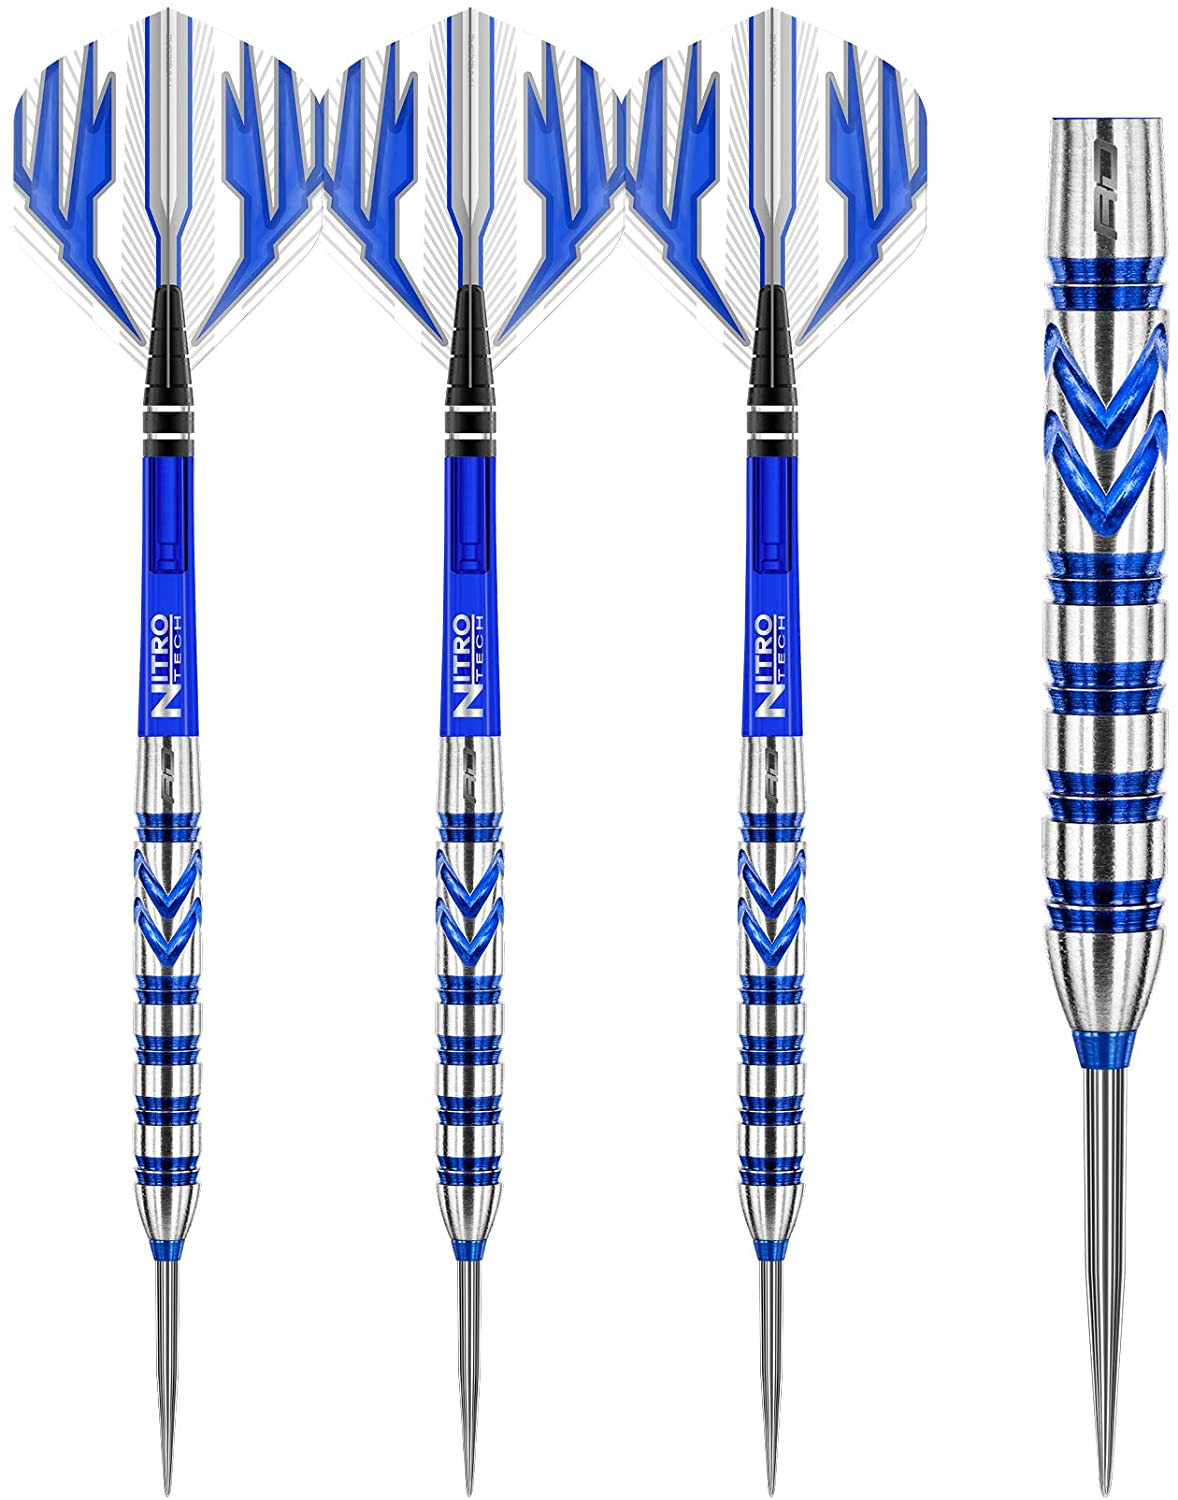 RED DRAGON Gerwyn Price Iceman Special Edition World Champion Tungsten Darts Set with Flights and Stems